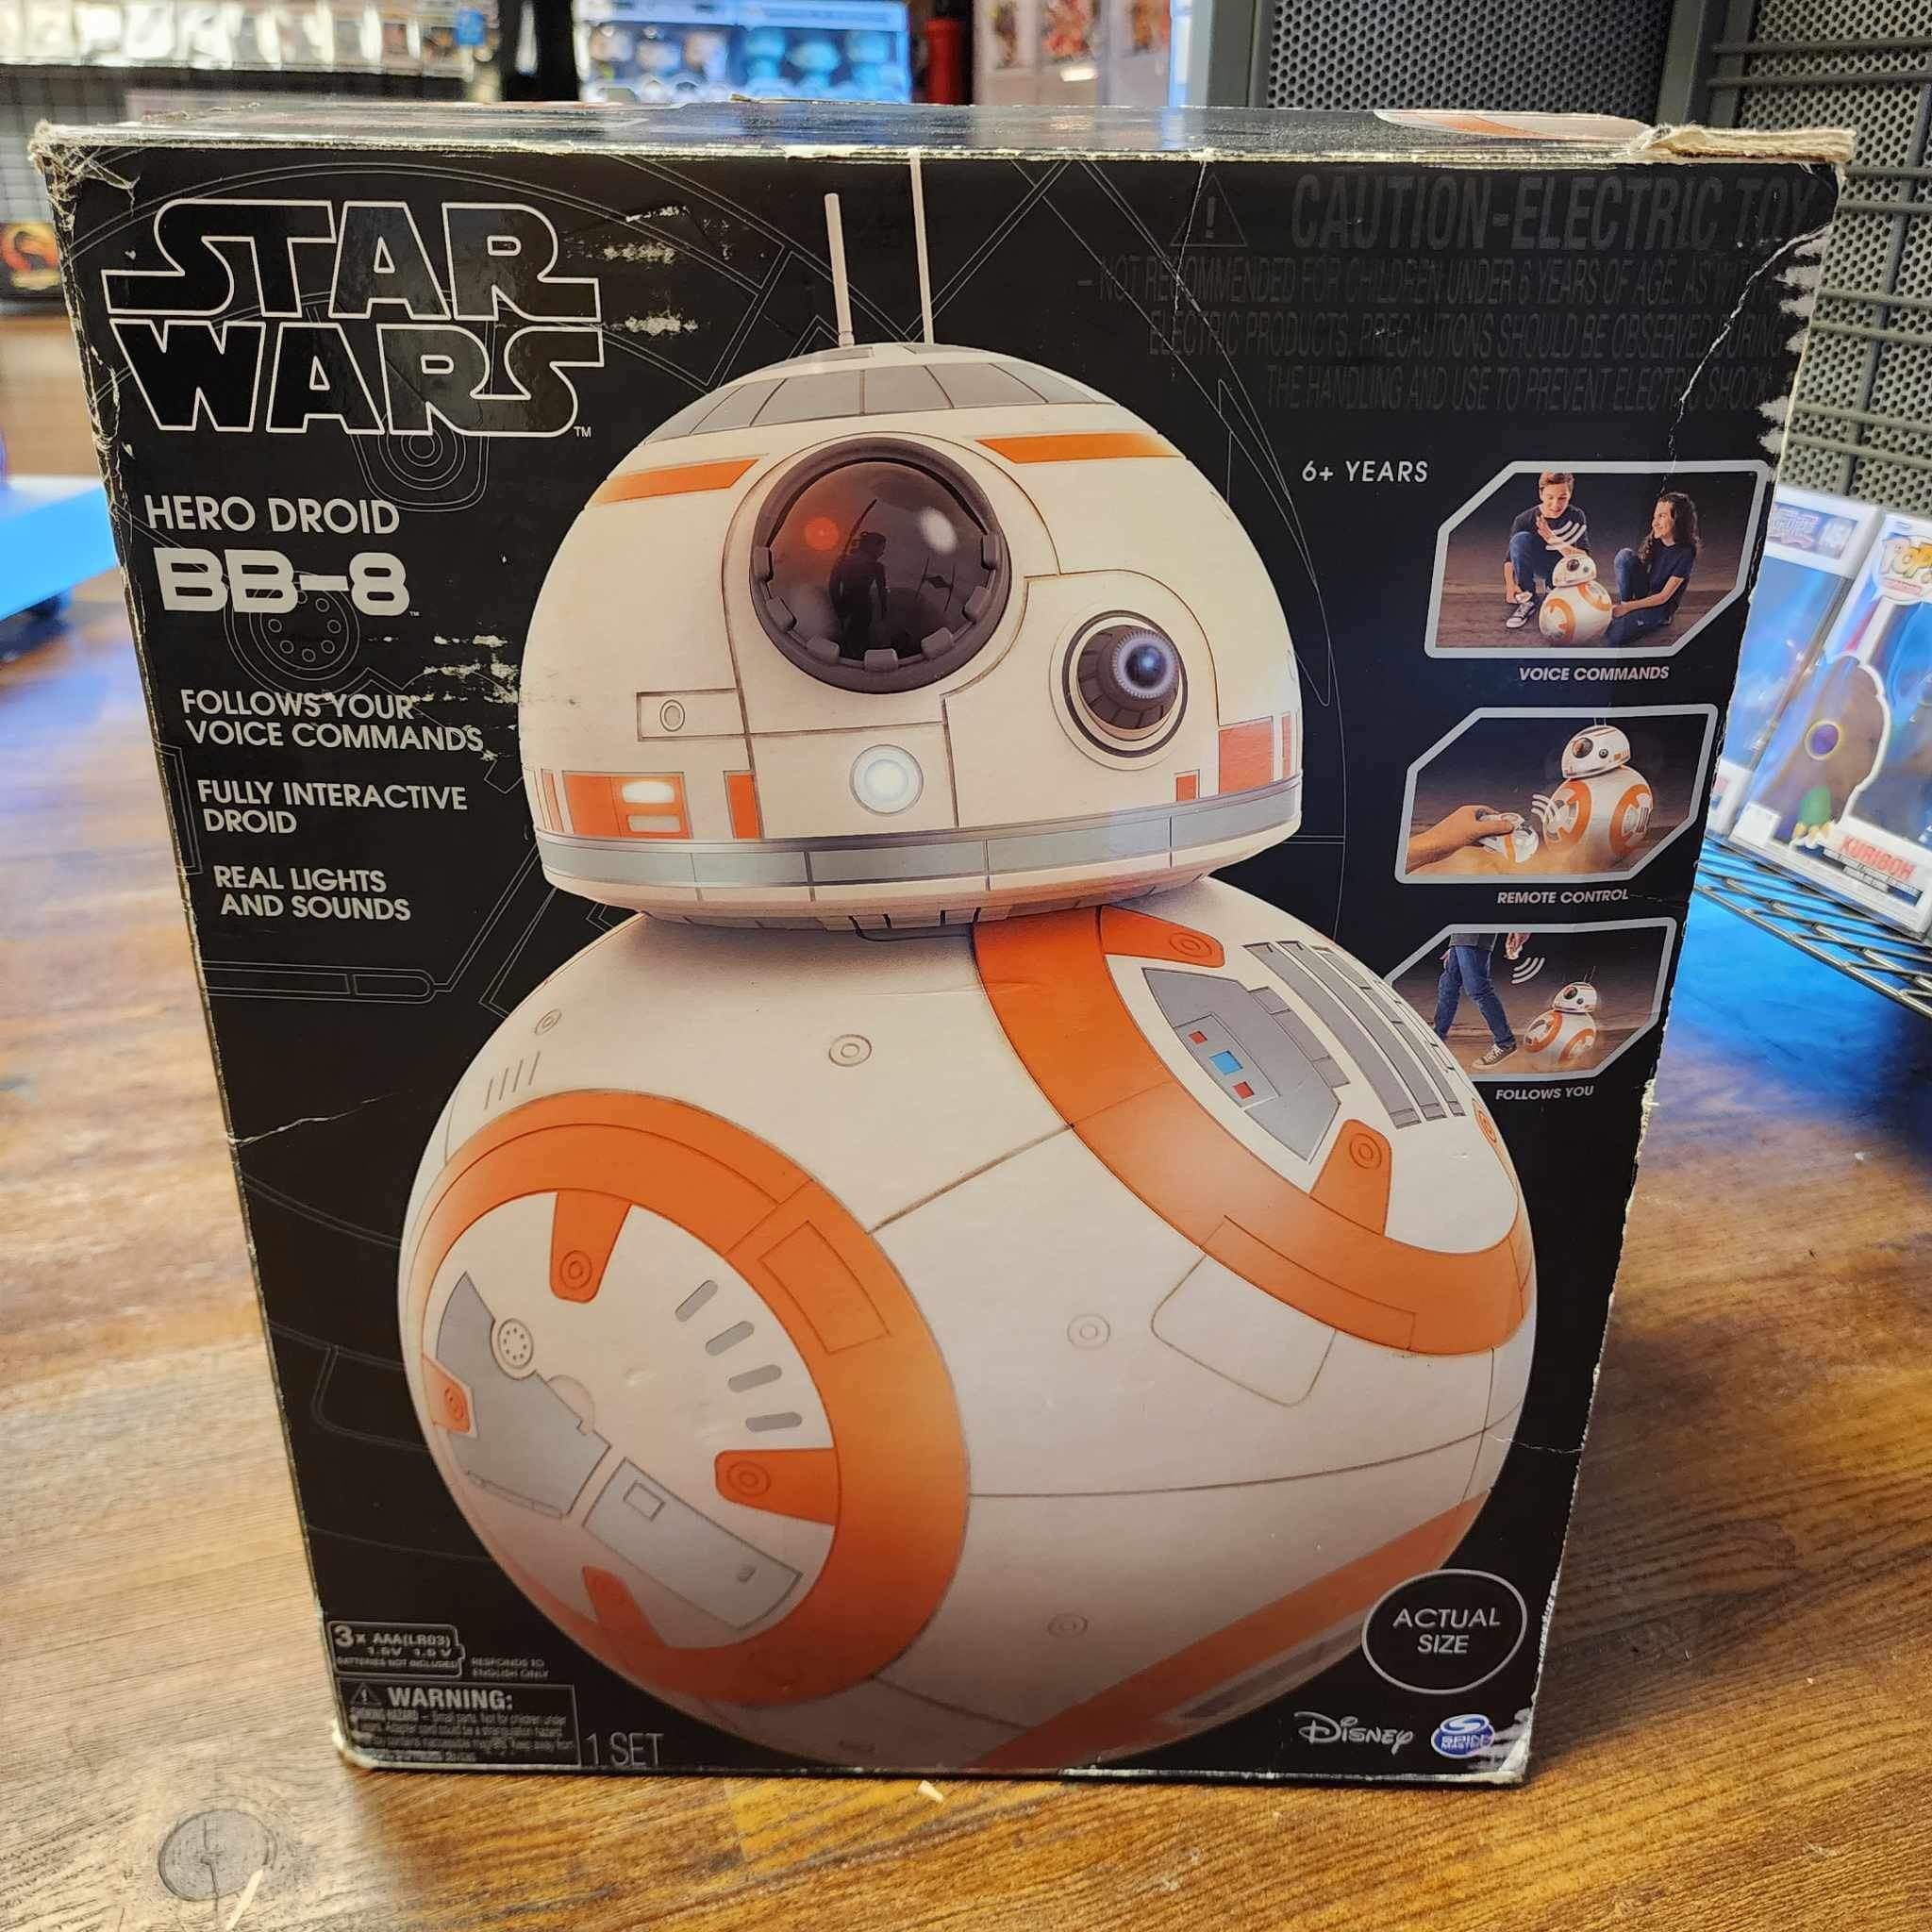 Spin Master Star Wars BB-8 Fully Interactive Droid